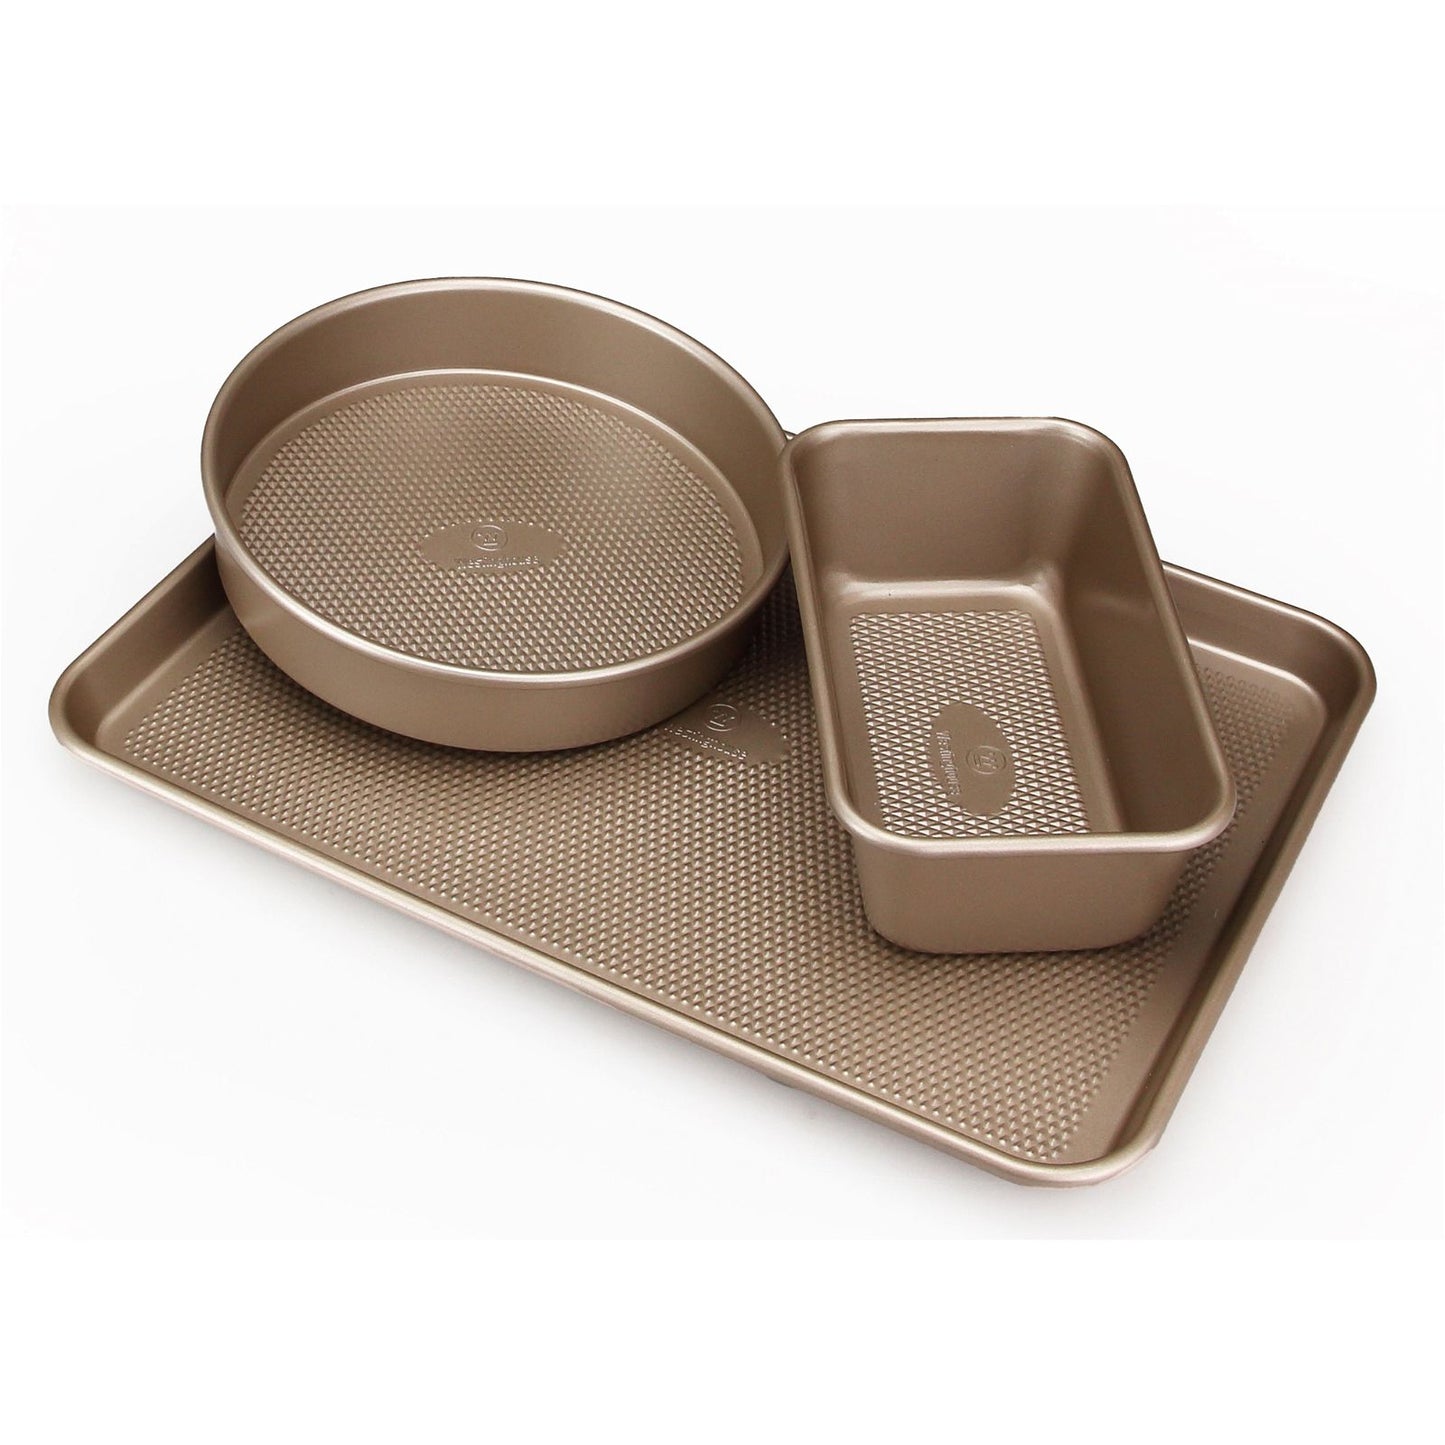 Westinghouse Baking Set Carbon Steel Diamond Texture-#product_category#- Distributed by:  under license